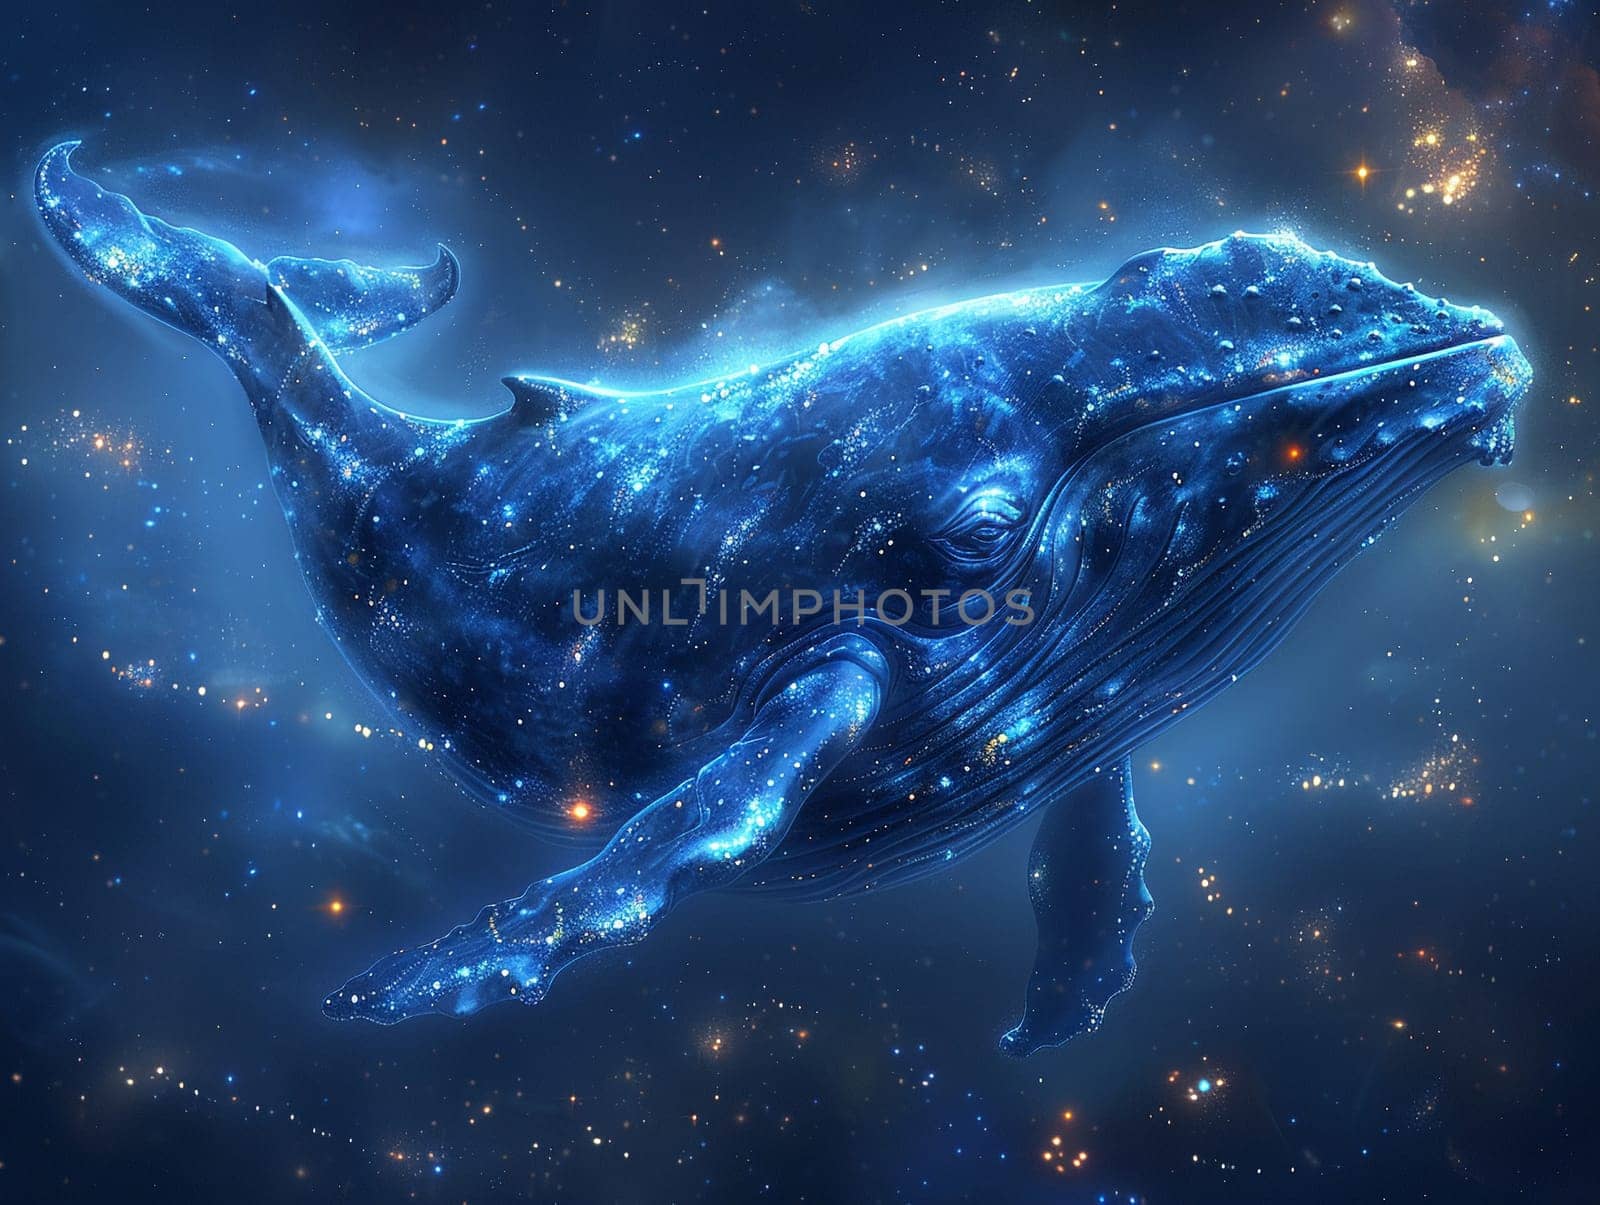 Whale constellation in the night sky by Benzoix